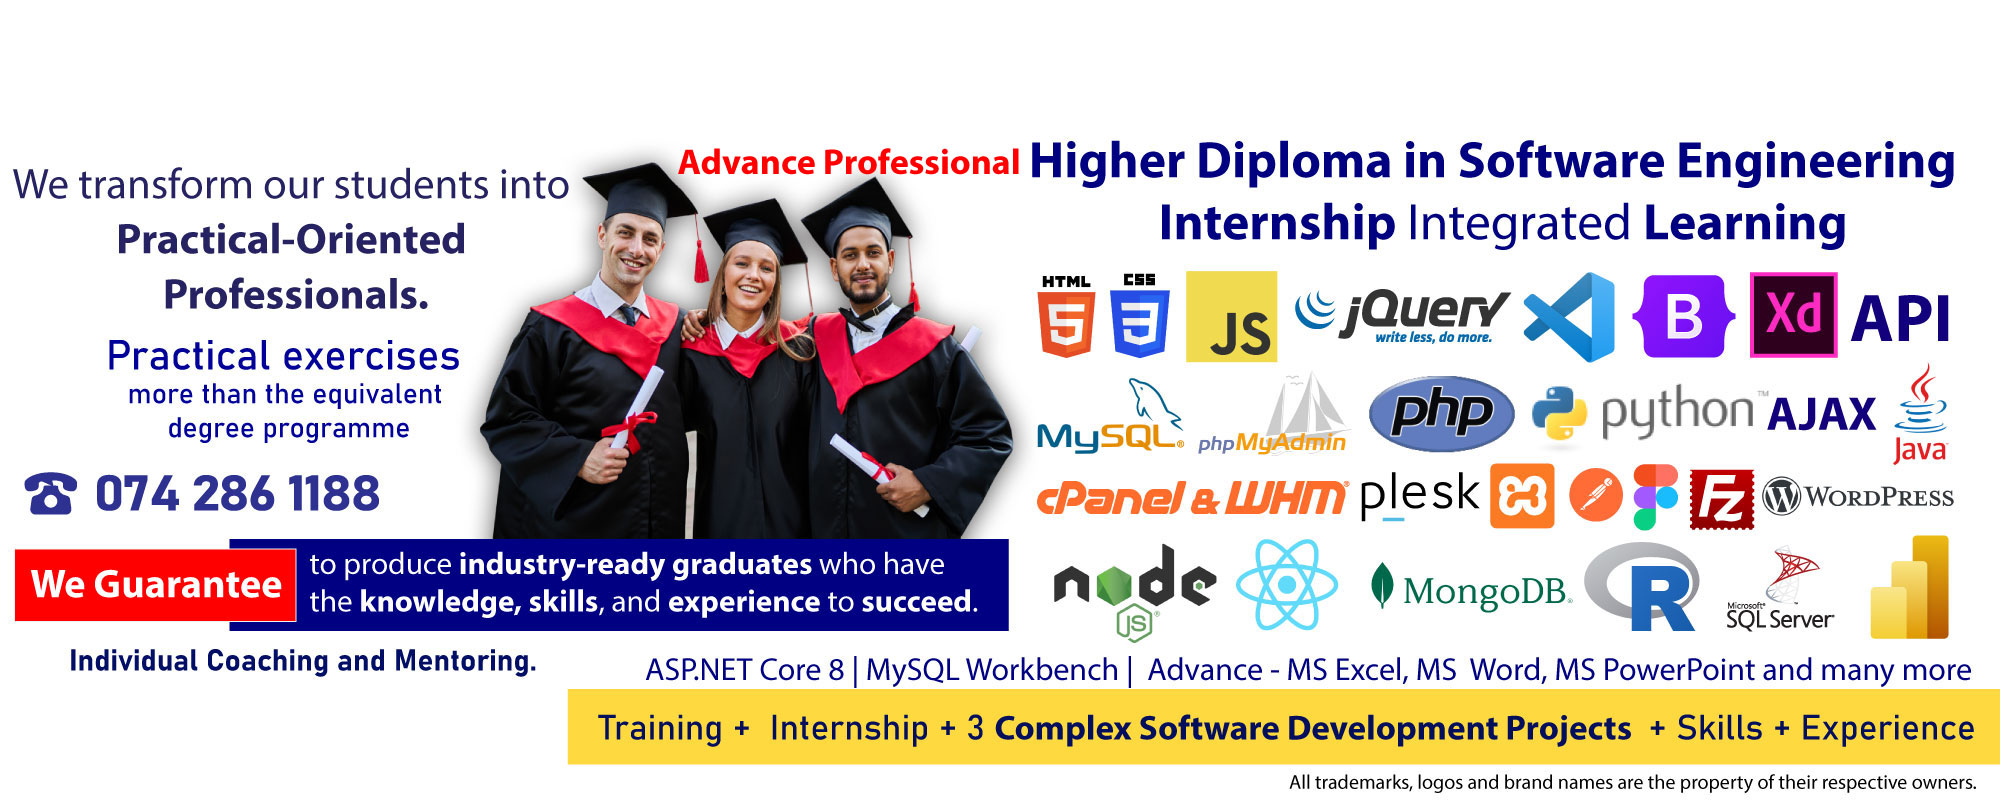 Advance Professional Higher Diploma in Software Engineering & IT